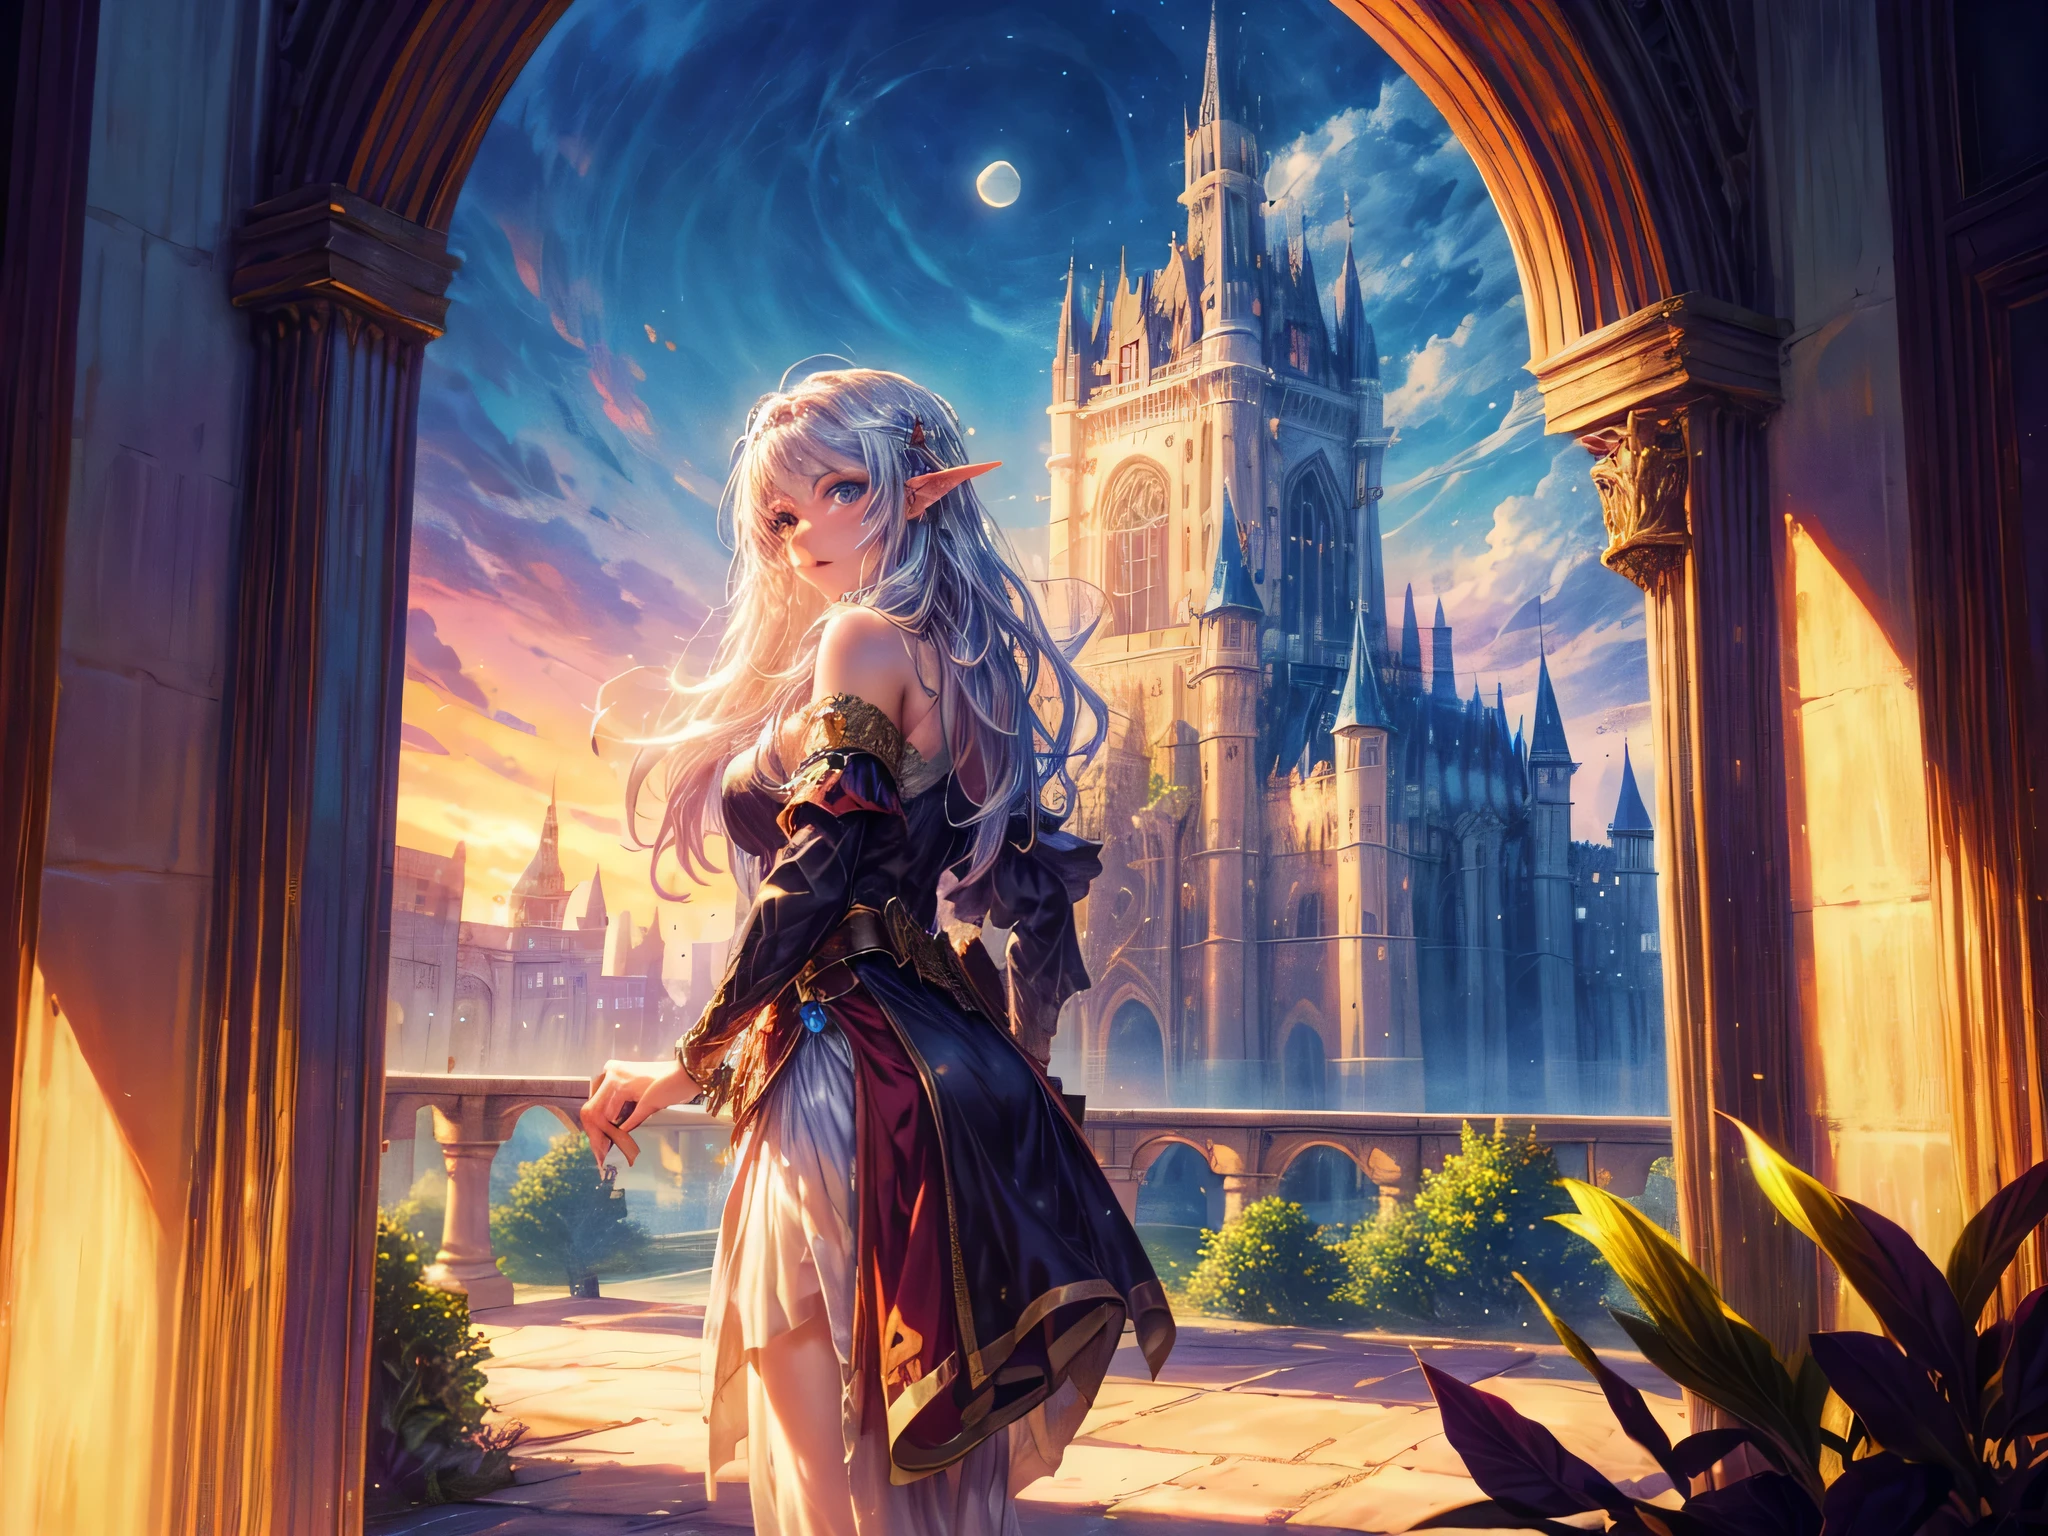 fantasy art, RPG art, a princess looking through her window at a magical castle, a beautiful elven princess looking through her window to see a magical castle, an impressive best detailed castle, with towers, bridges, a moat, standing on top of a mountain, moon, 